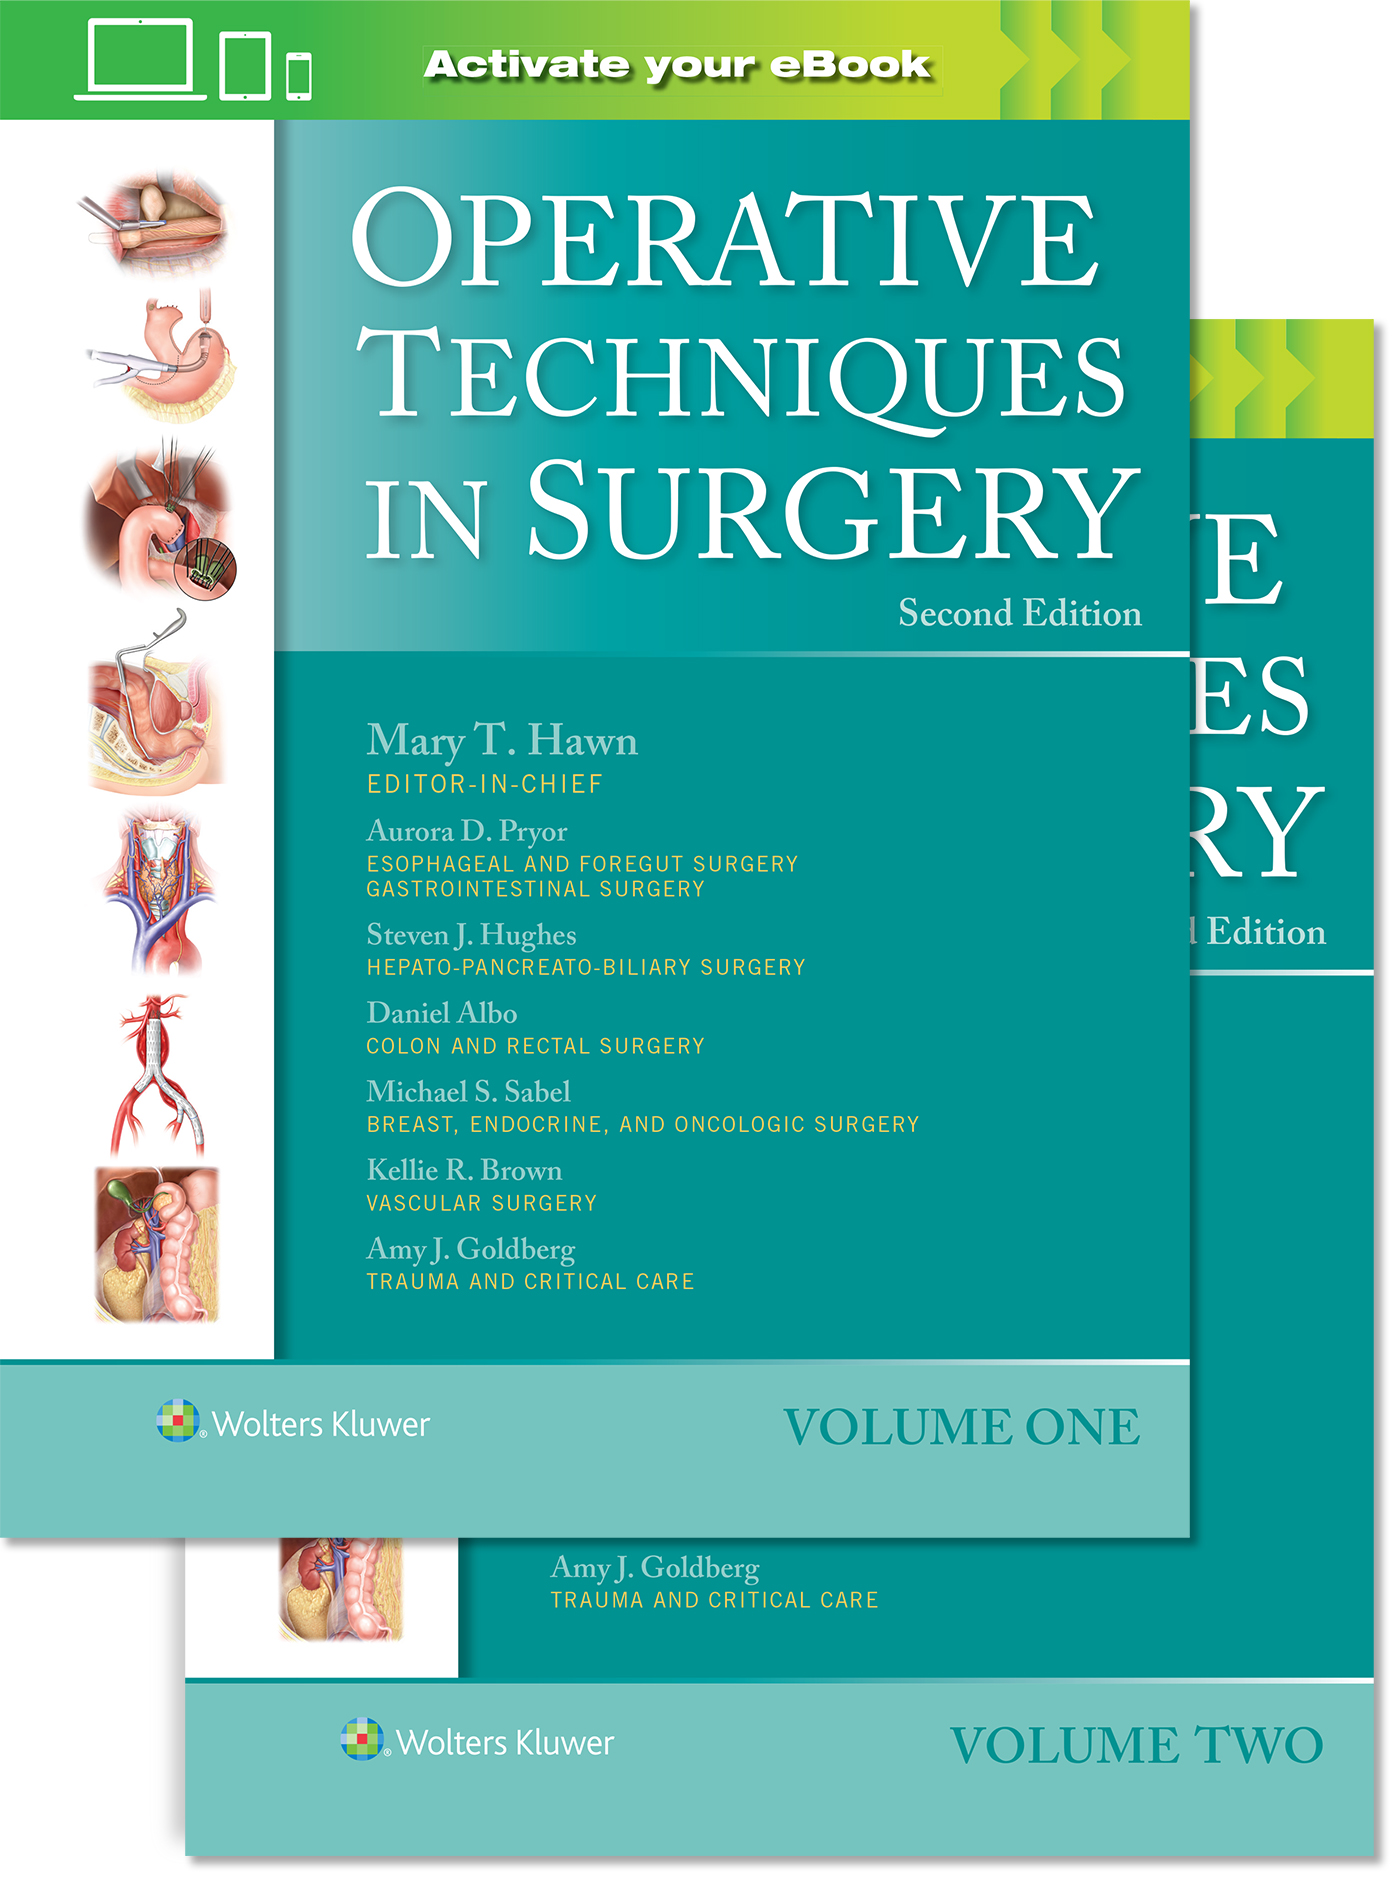 Operative Techniques in Surgery